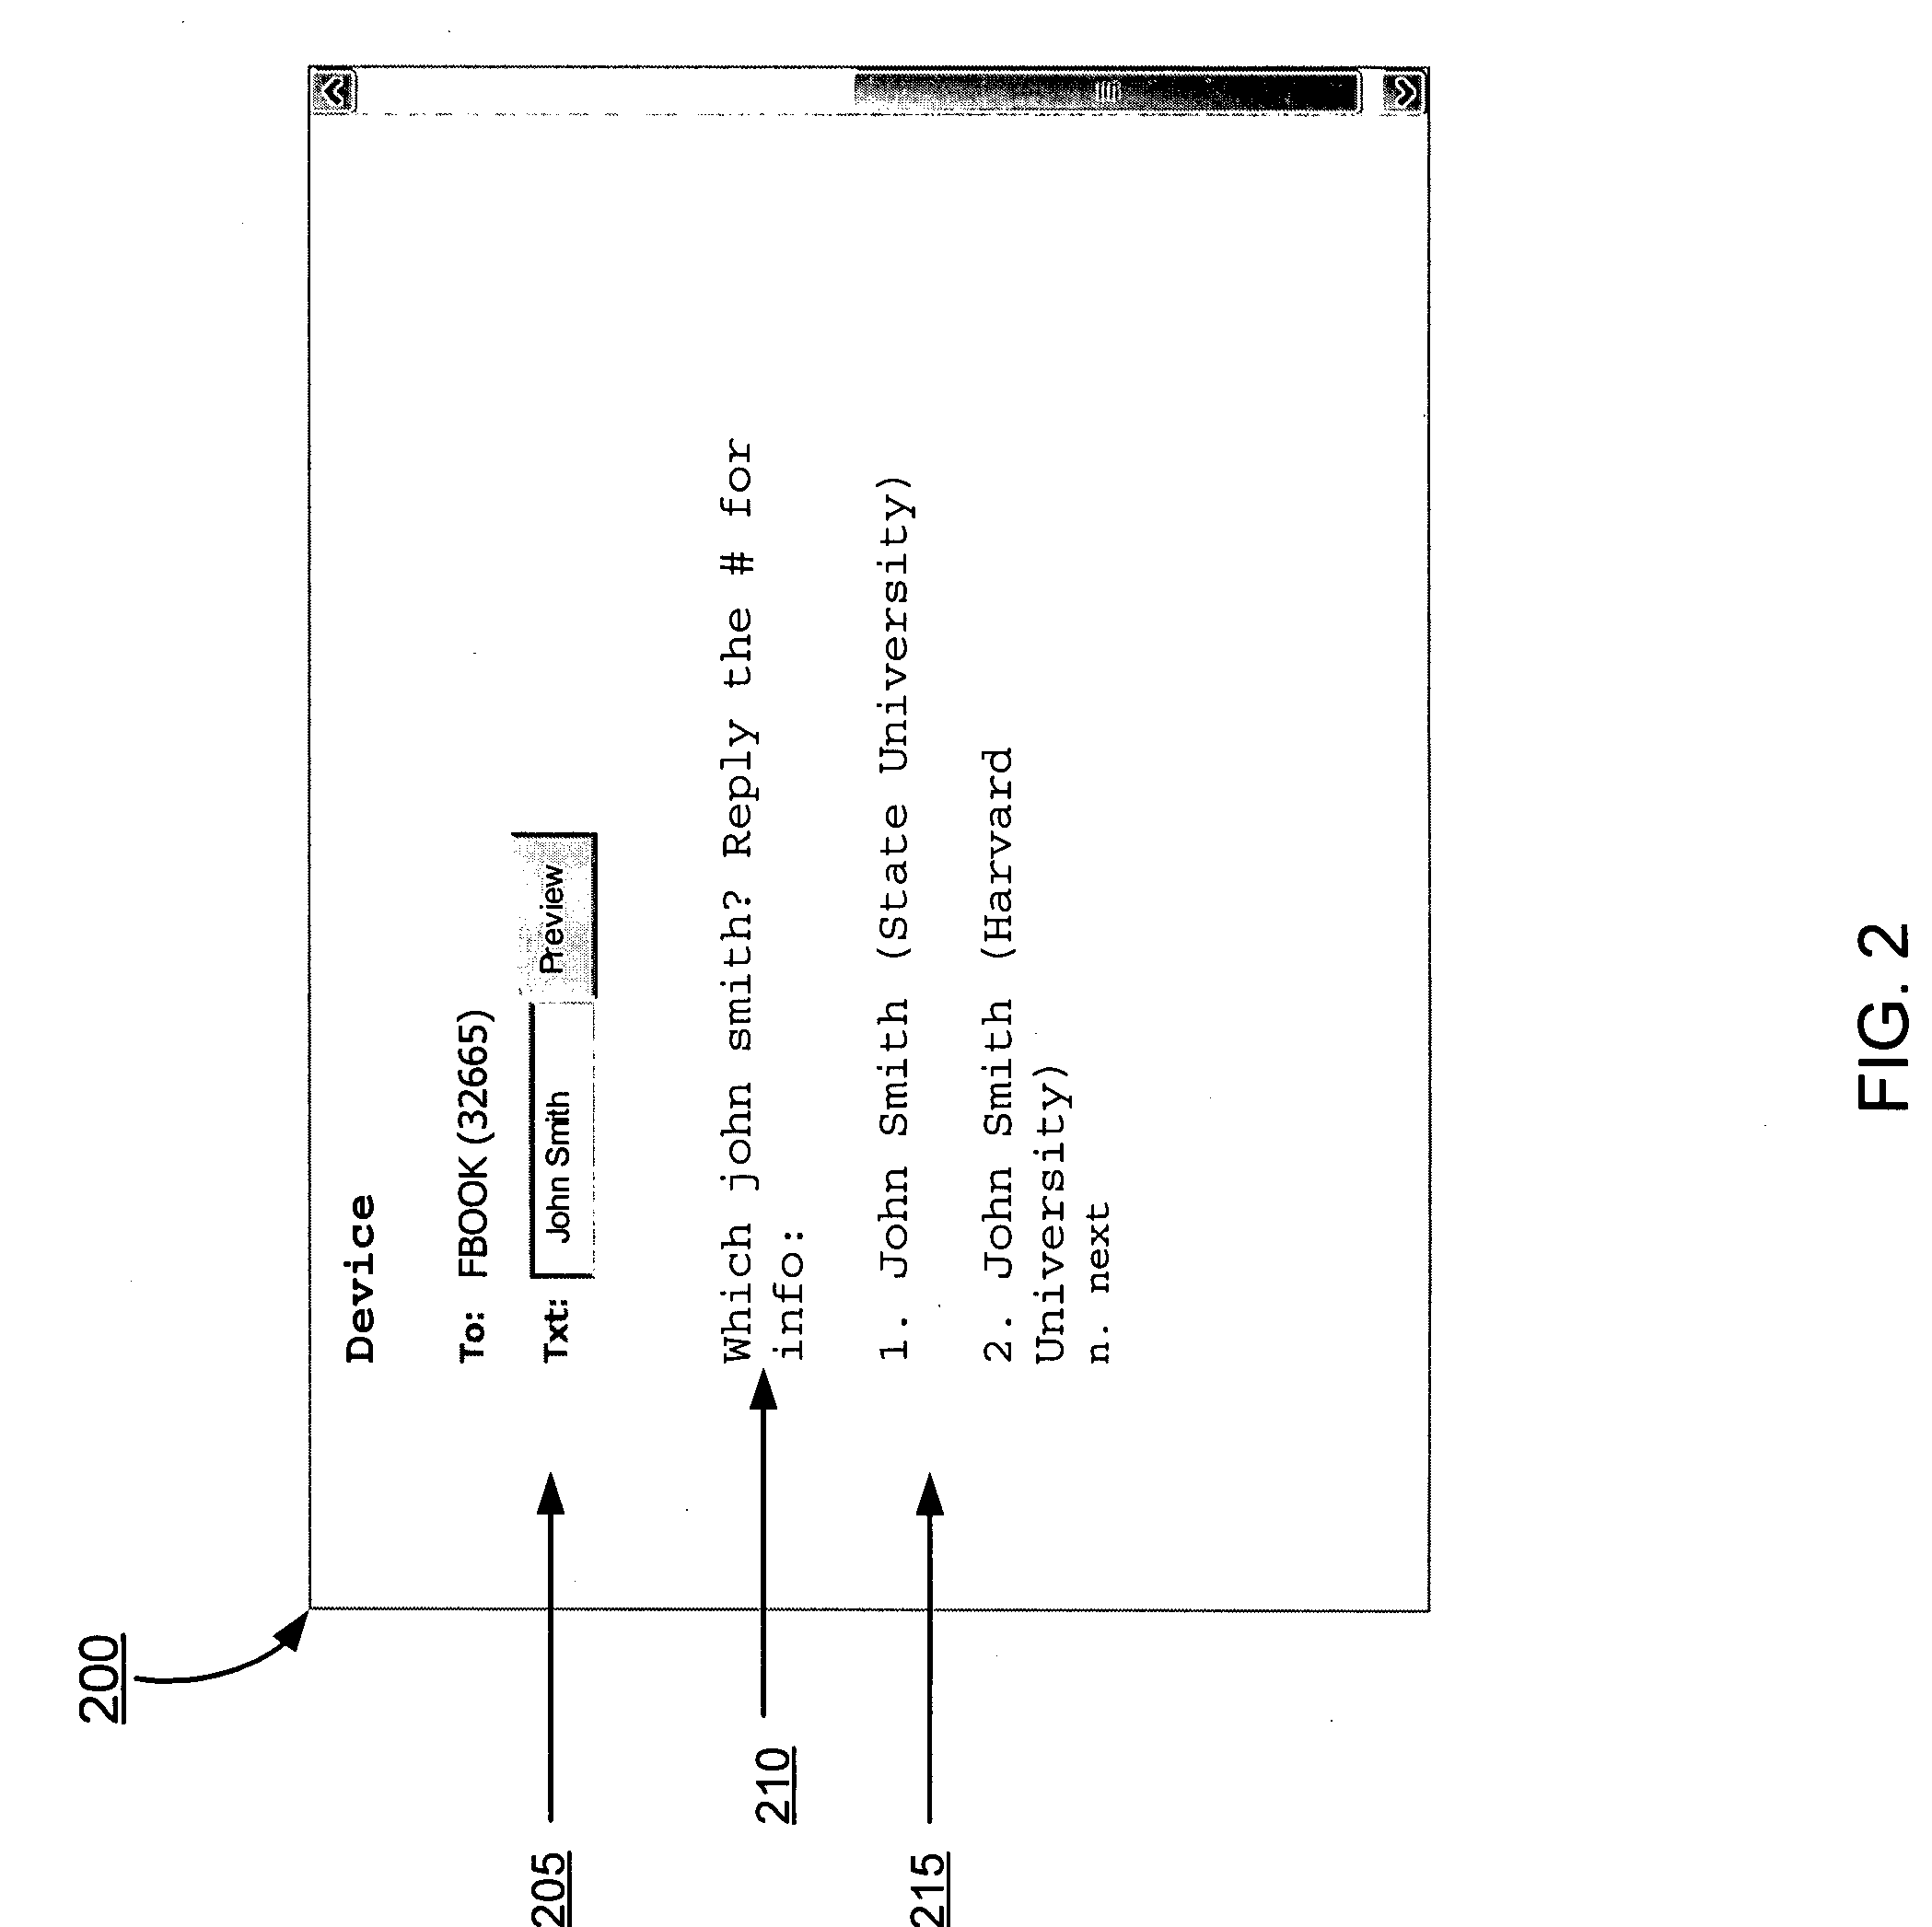 System and method for automatic population of a contact file with contact content and expression content